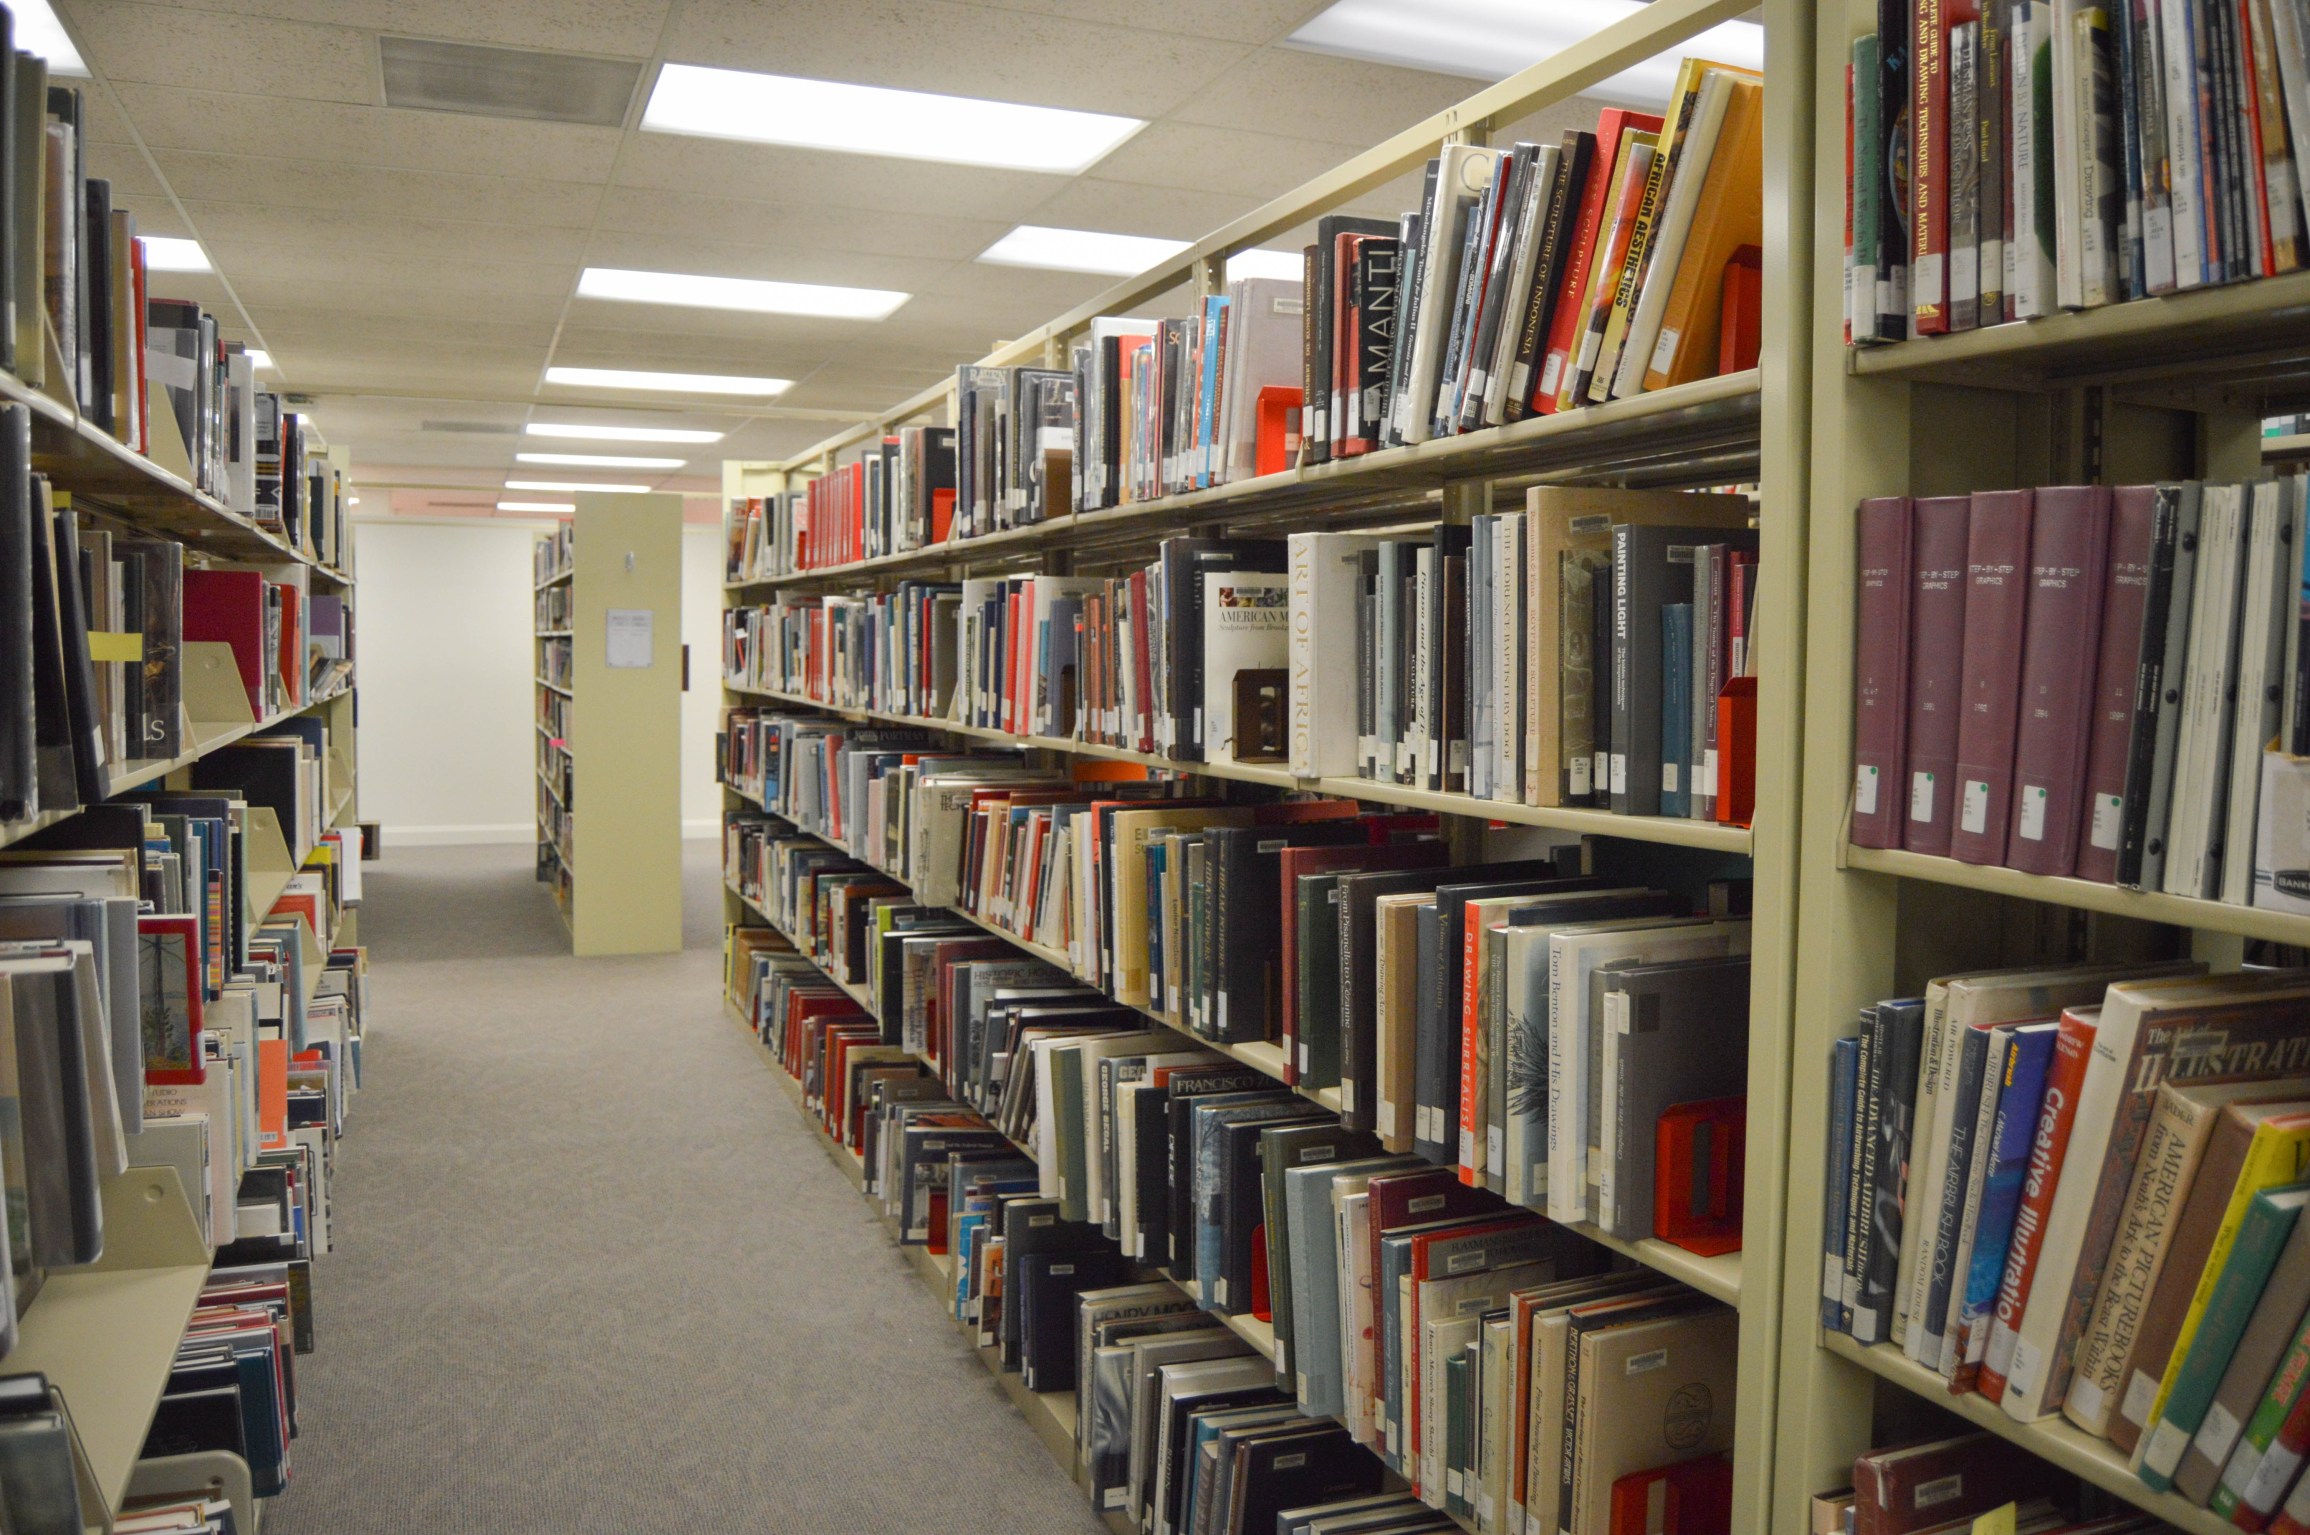 Library system experiences smaller budget, fees compared to other R2 institutions